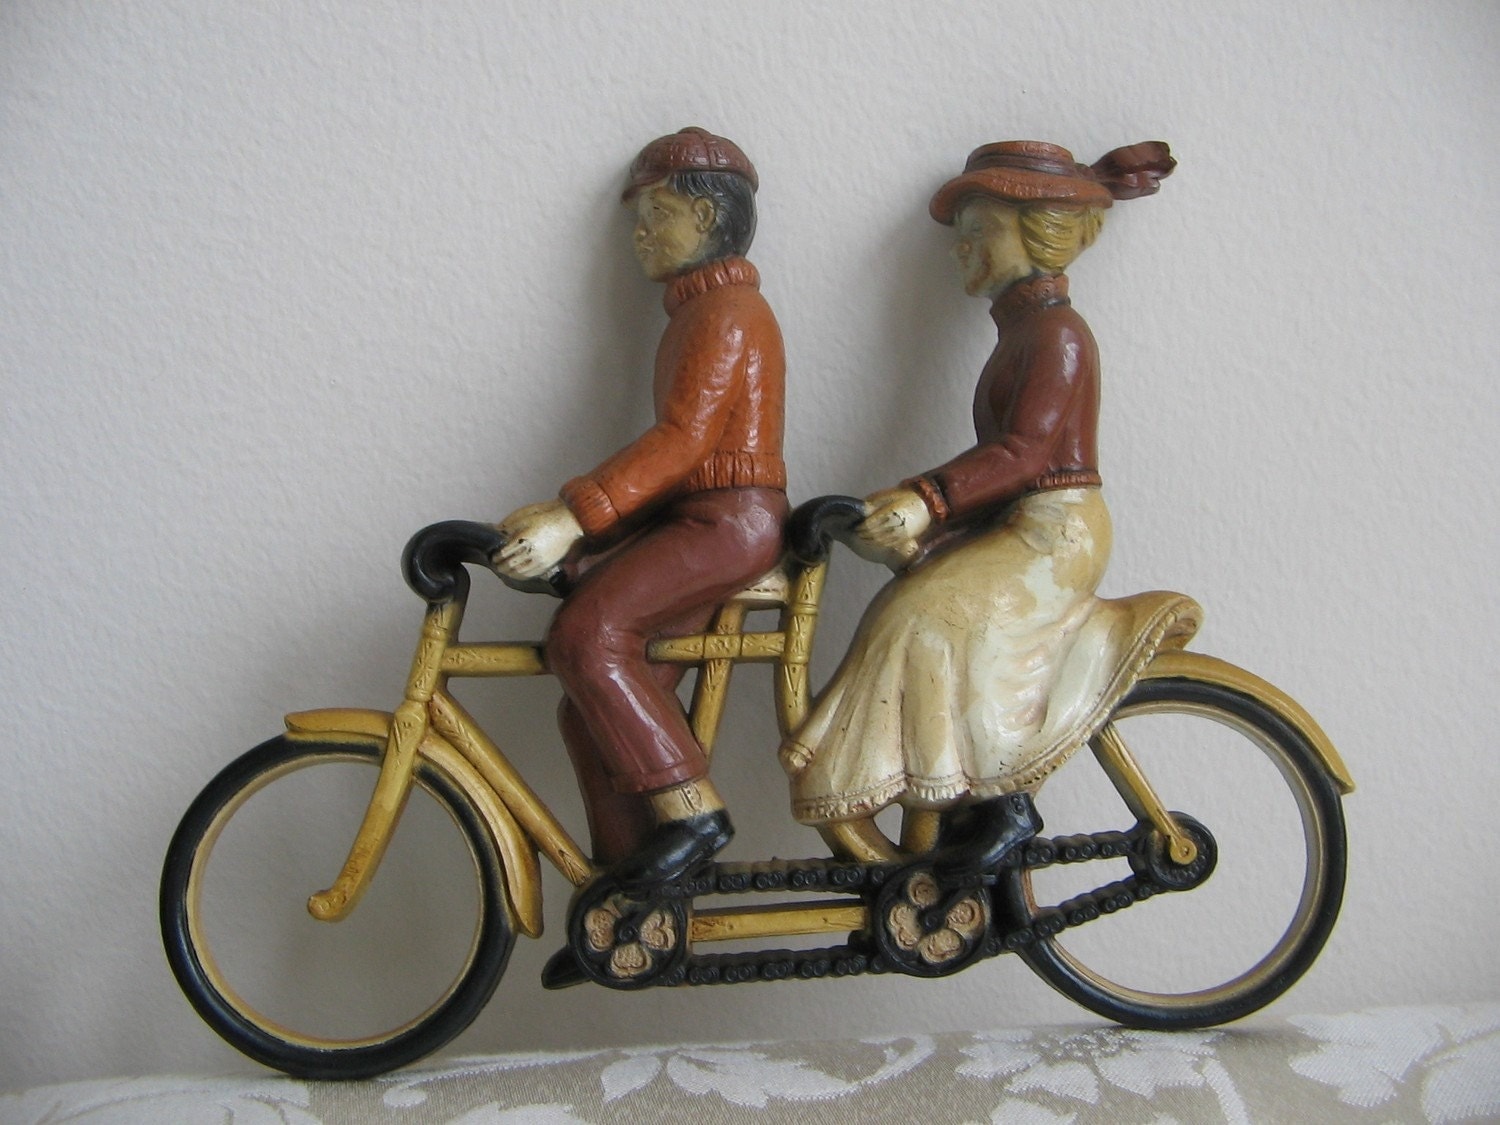 Vintage Bicycle Built For Two Wall Art Homco 1975